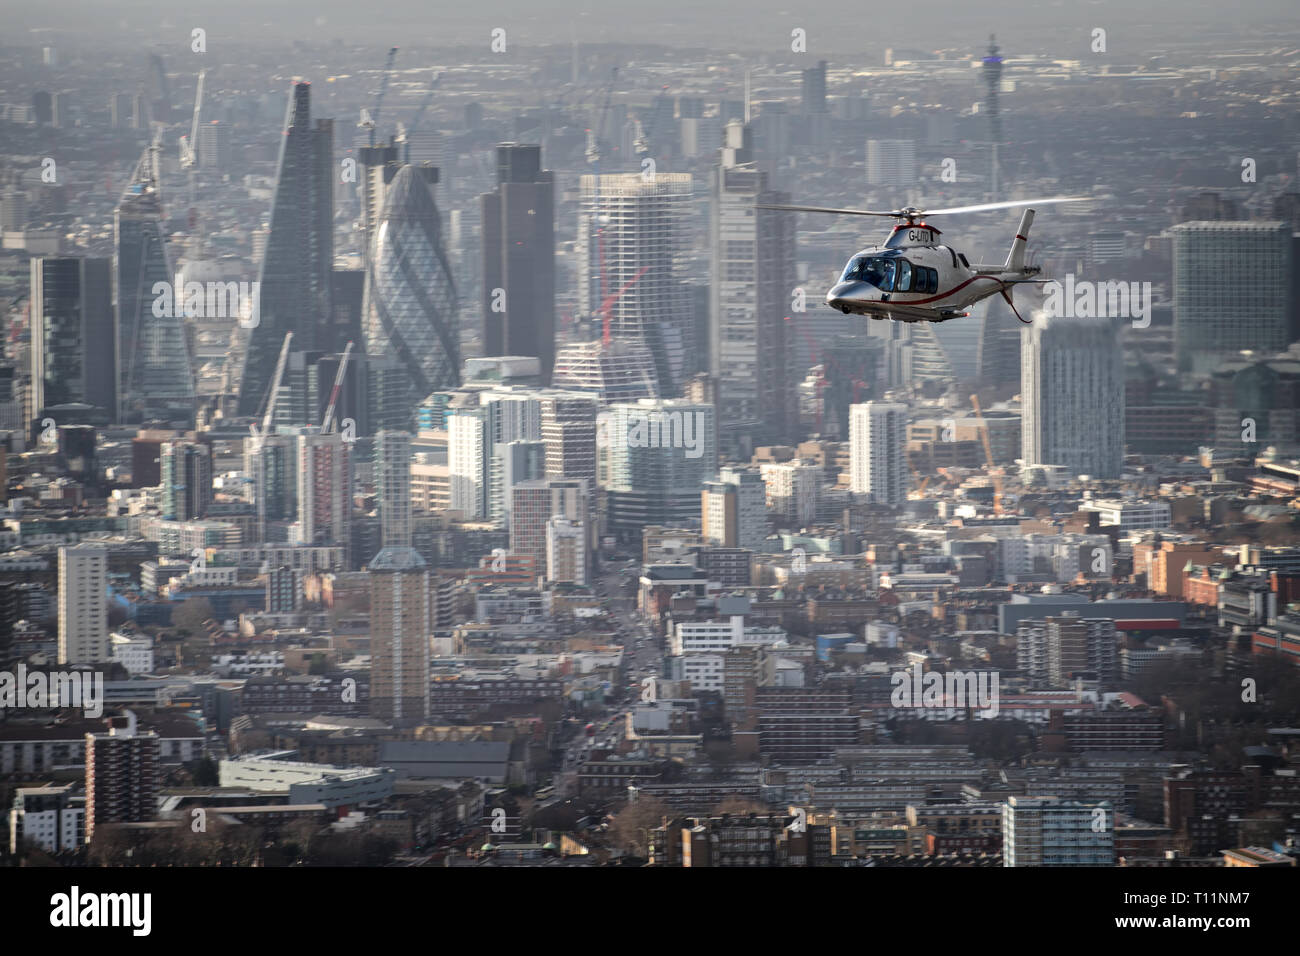 AW109 charter helicopter flying over London during an aerial photoshoot. Stock Photo